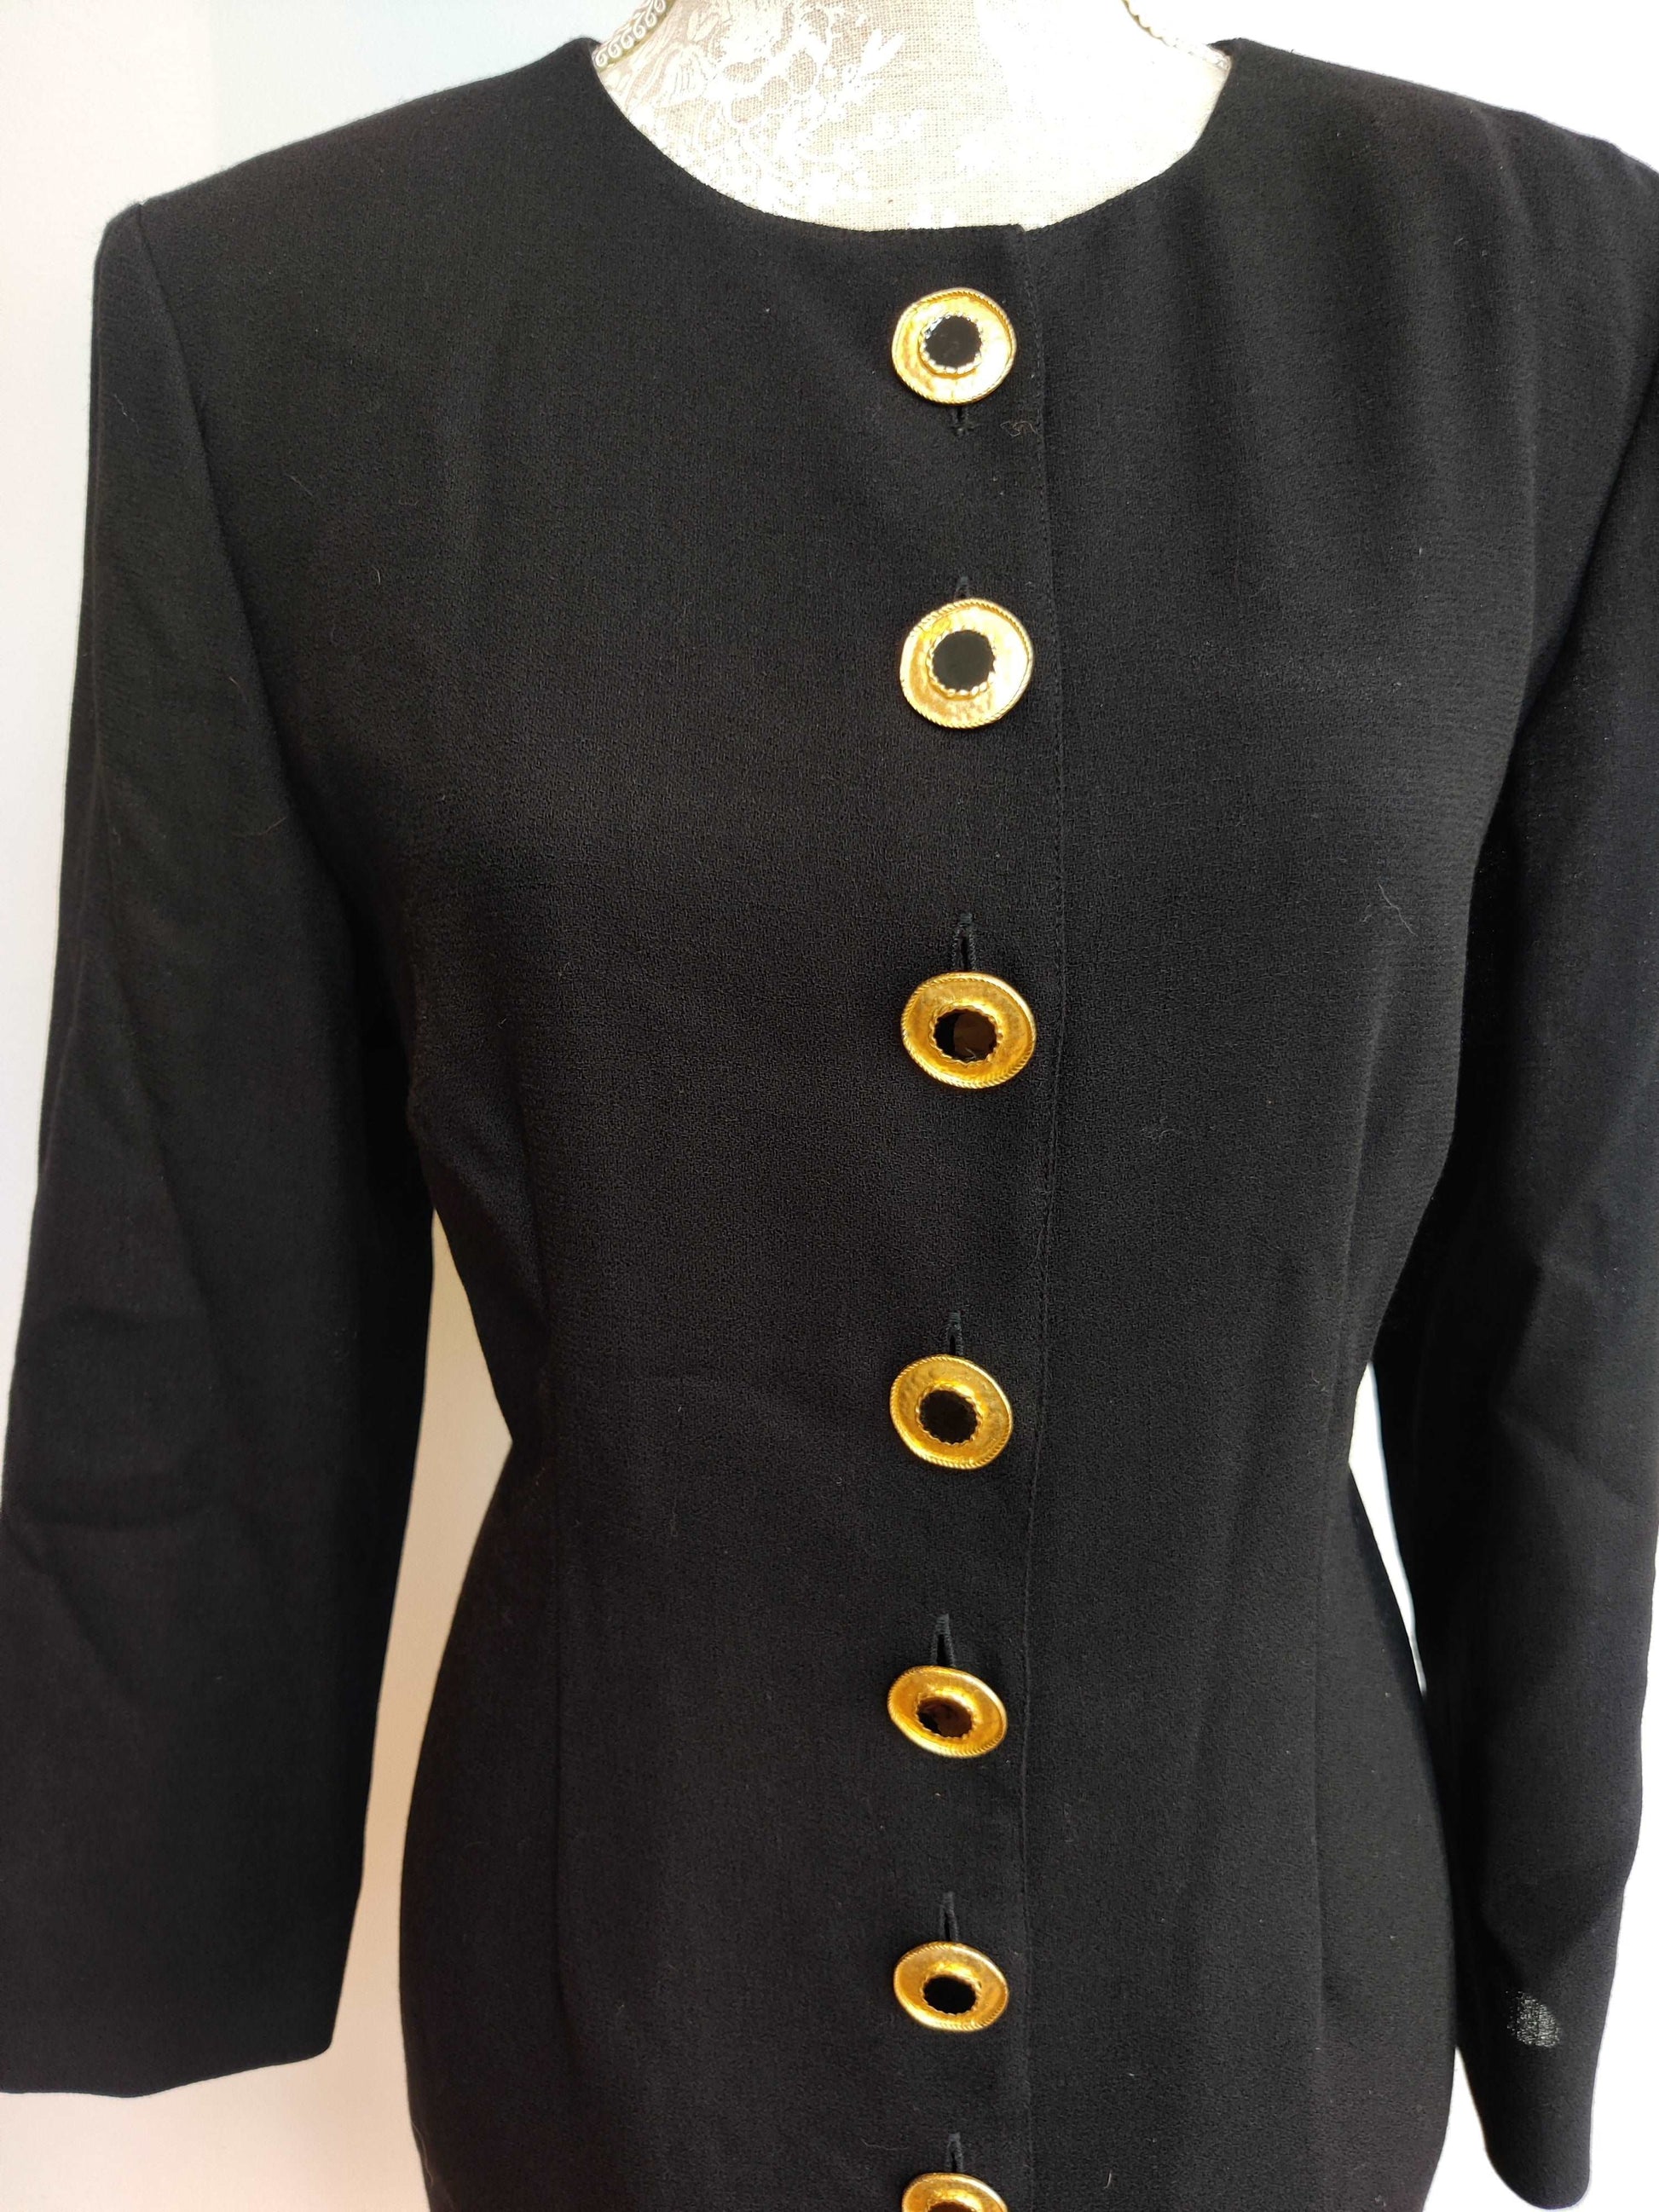 Black vintage dress with gold statement buttons 